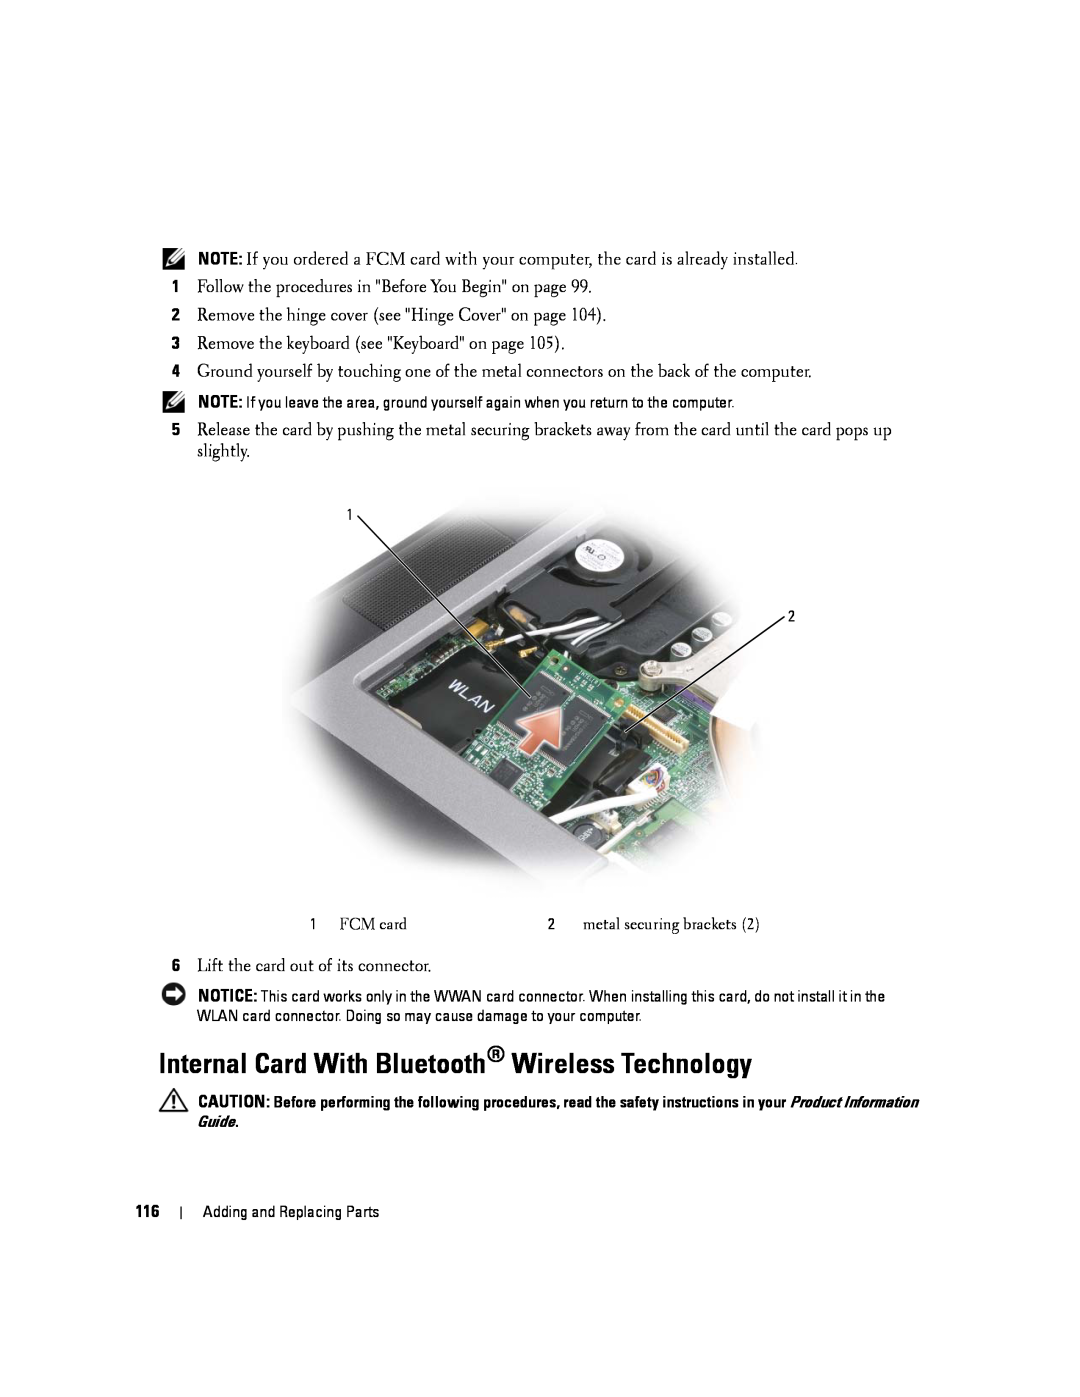 Dell PP04X, D830 manual Internal Card With Bluetooth Wireless Technology, Guide 